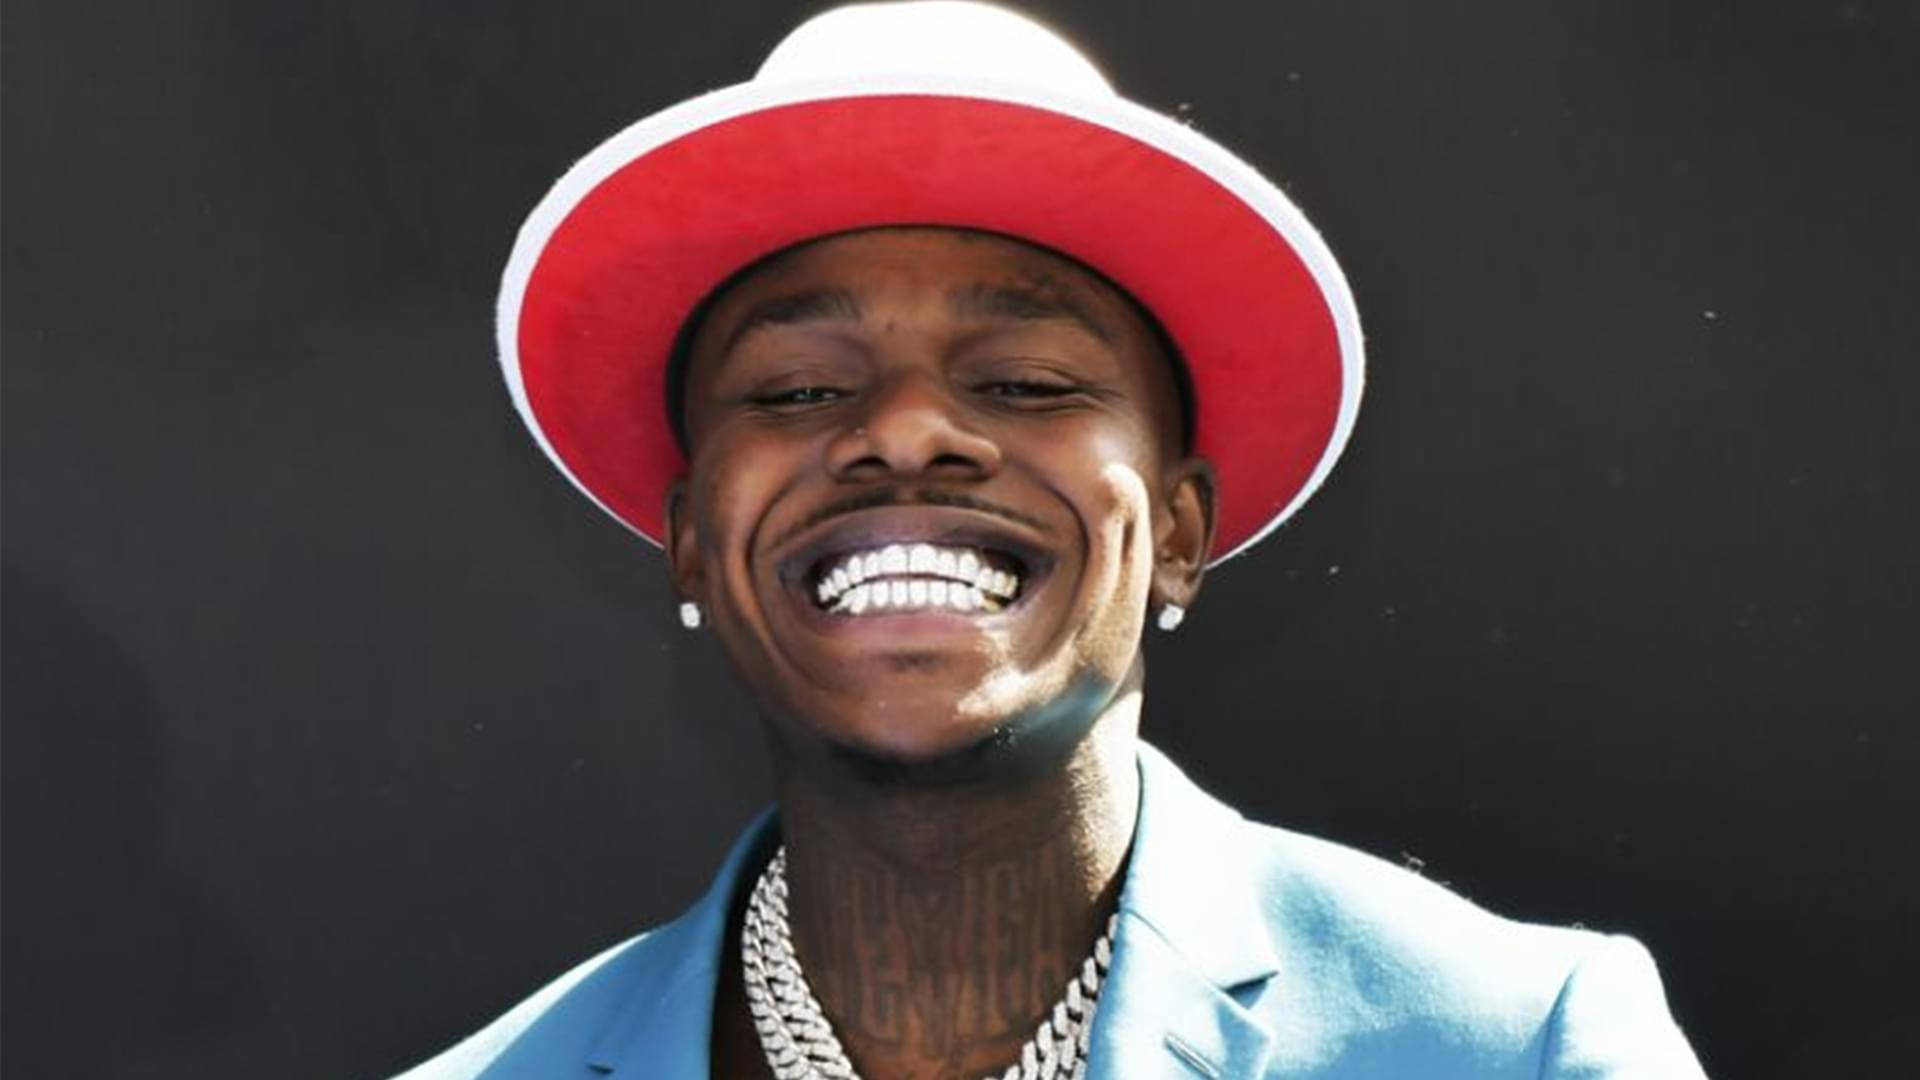 Caption: Dababy In Action - Dynamic Stage Performance Wallpaper